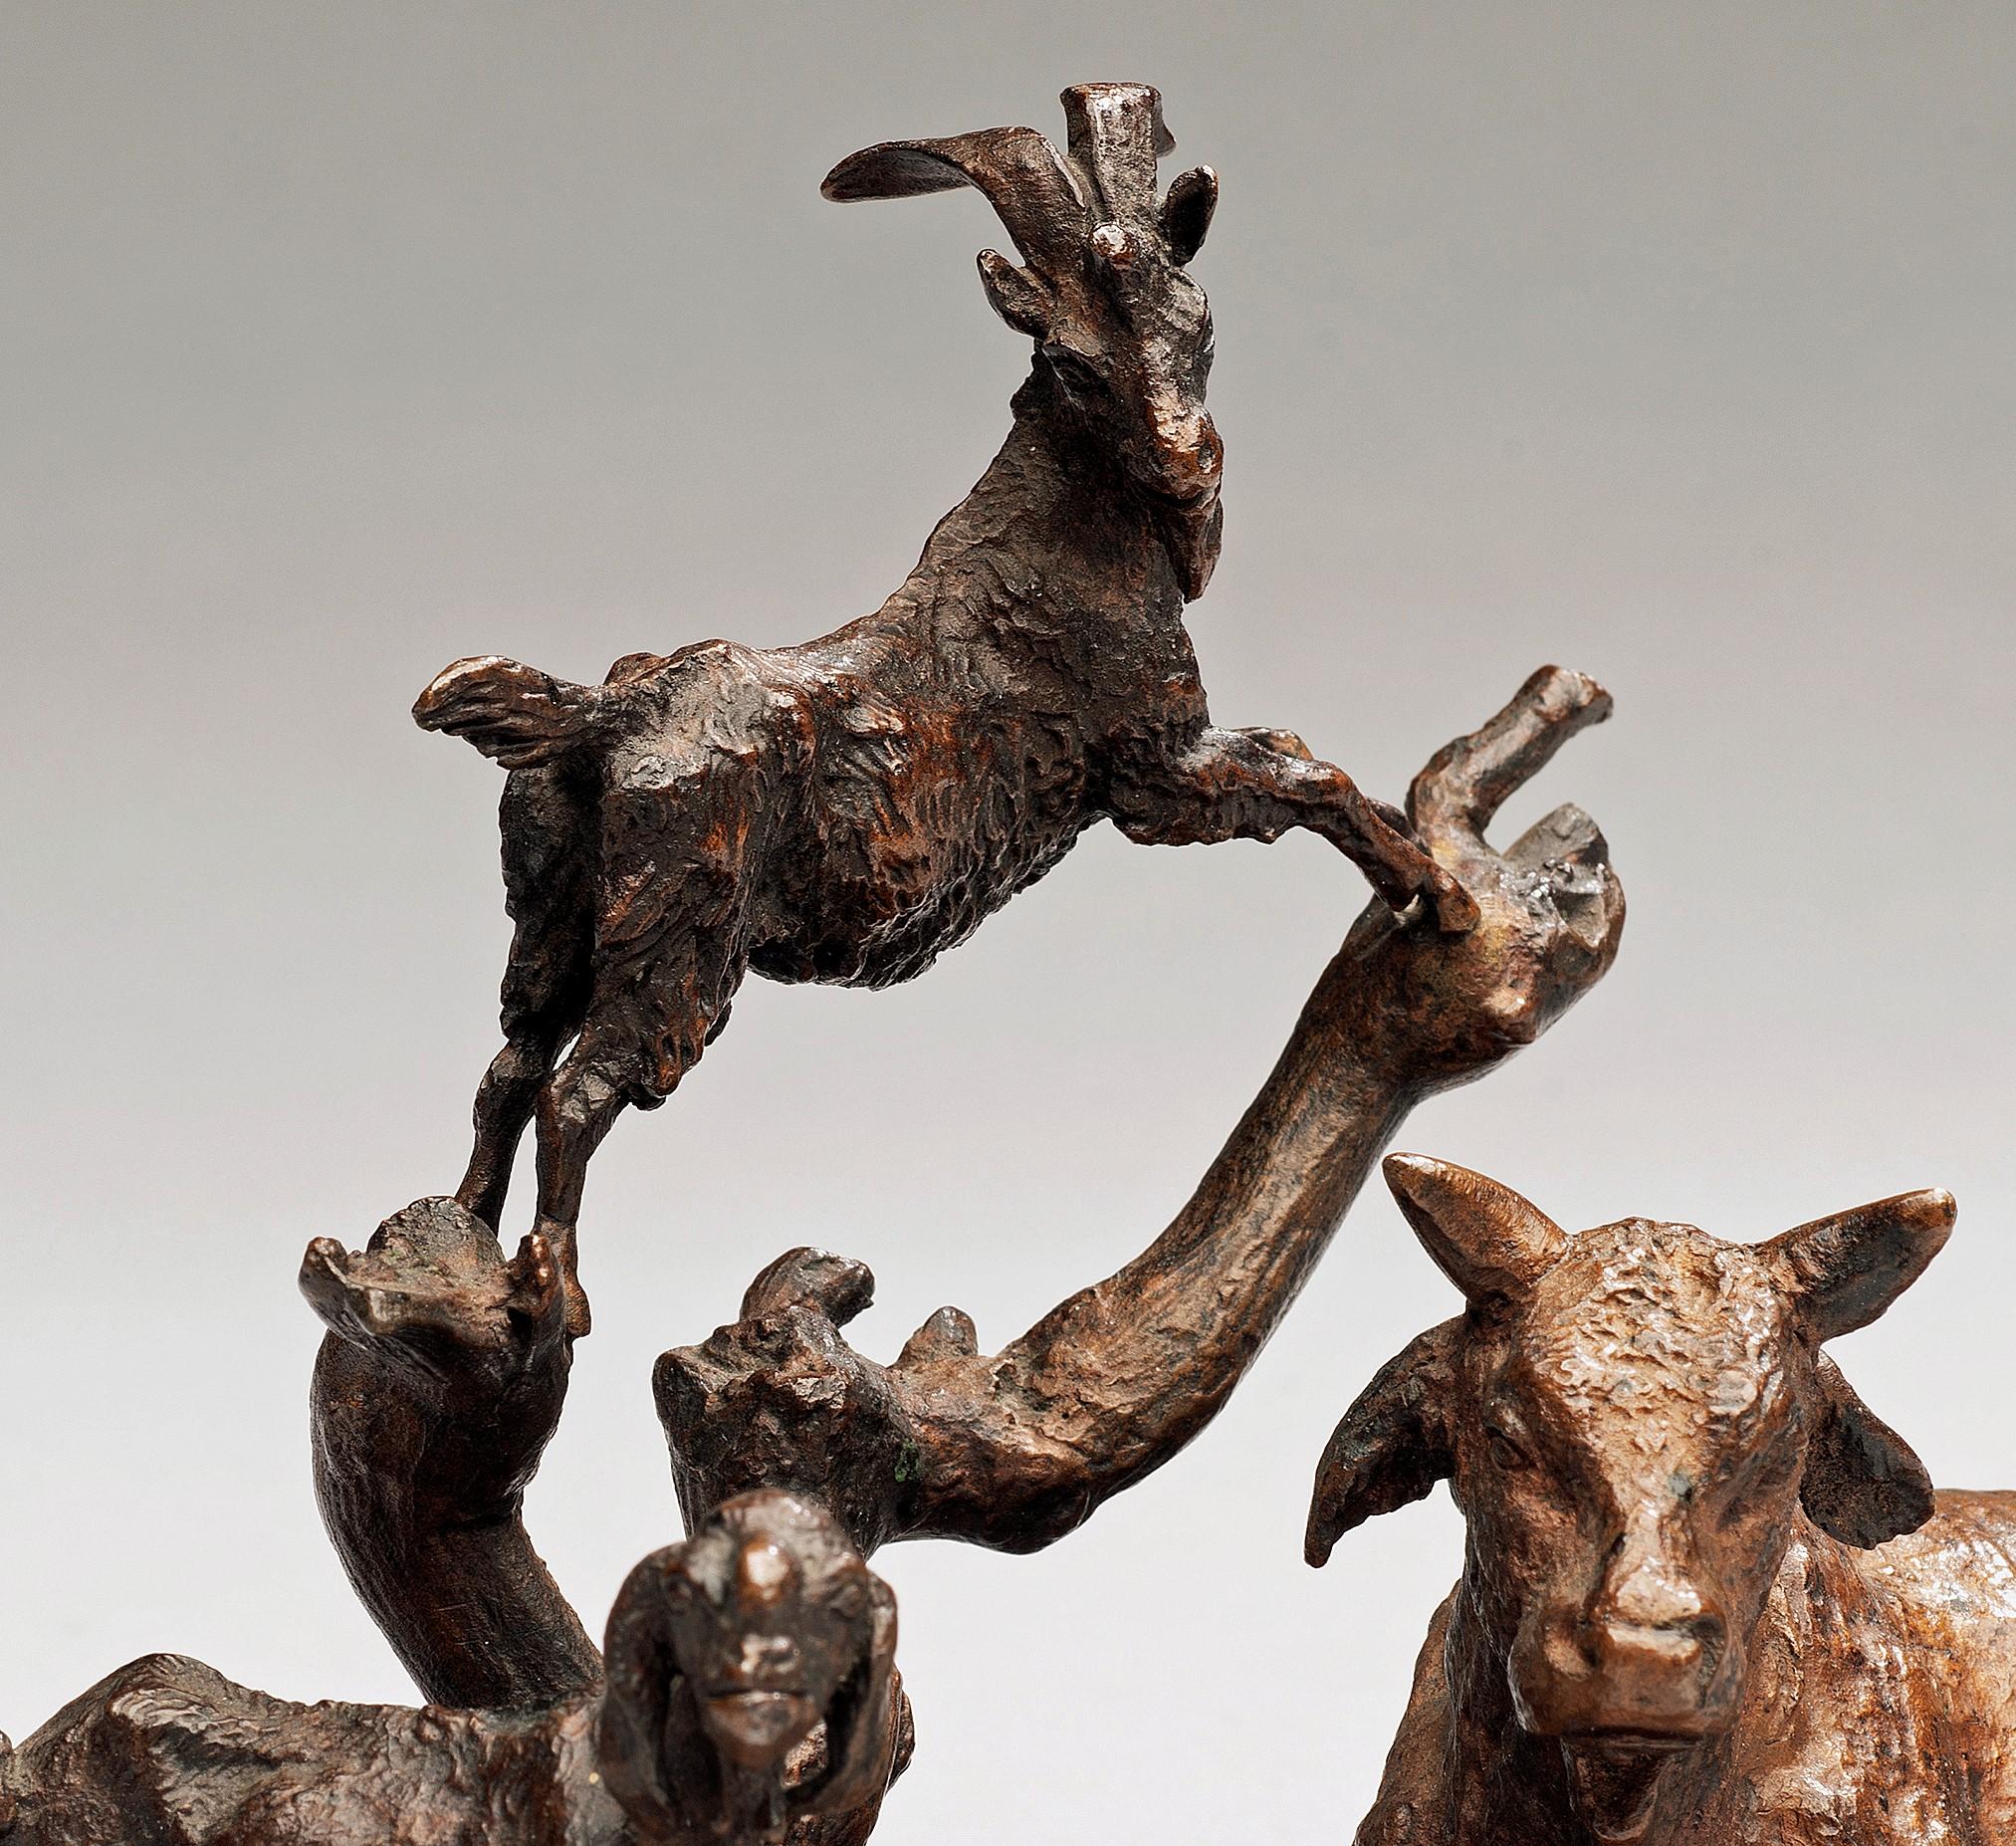 Antique Bronze Miniature Barnyard Scene (Cow, Sheep & Goat)
Christophe Fratin (France, 1801-1864)
Sand cast bronze
5 3/4 x 4 1/4 x 2 1/4 inches

Highly refined and sensitively modeled miniature bronze representing a small herd of cattle, sheep and